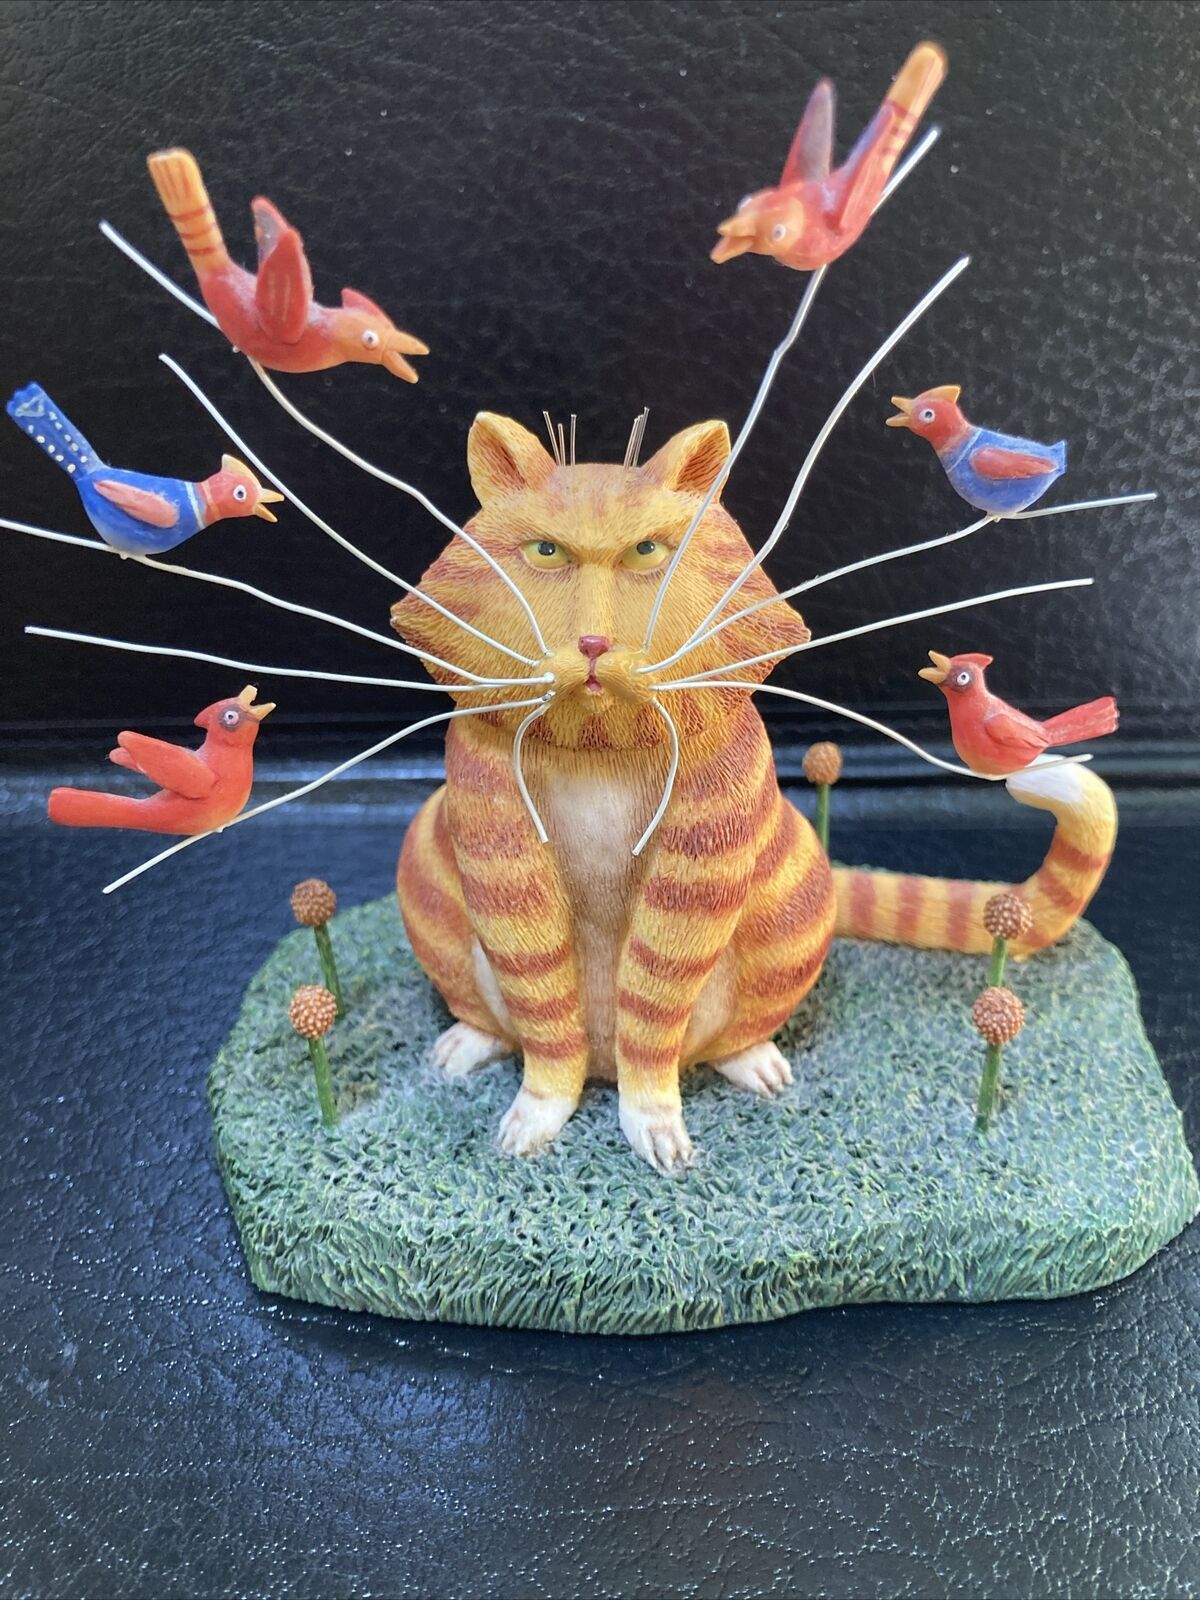 Lang 2004 “Taunting Theodore” Wit & Whimsy”-Tabby Cat w/Birds Figurine Sculpture